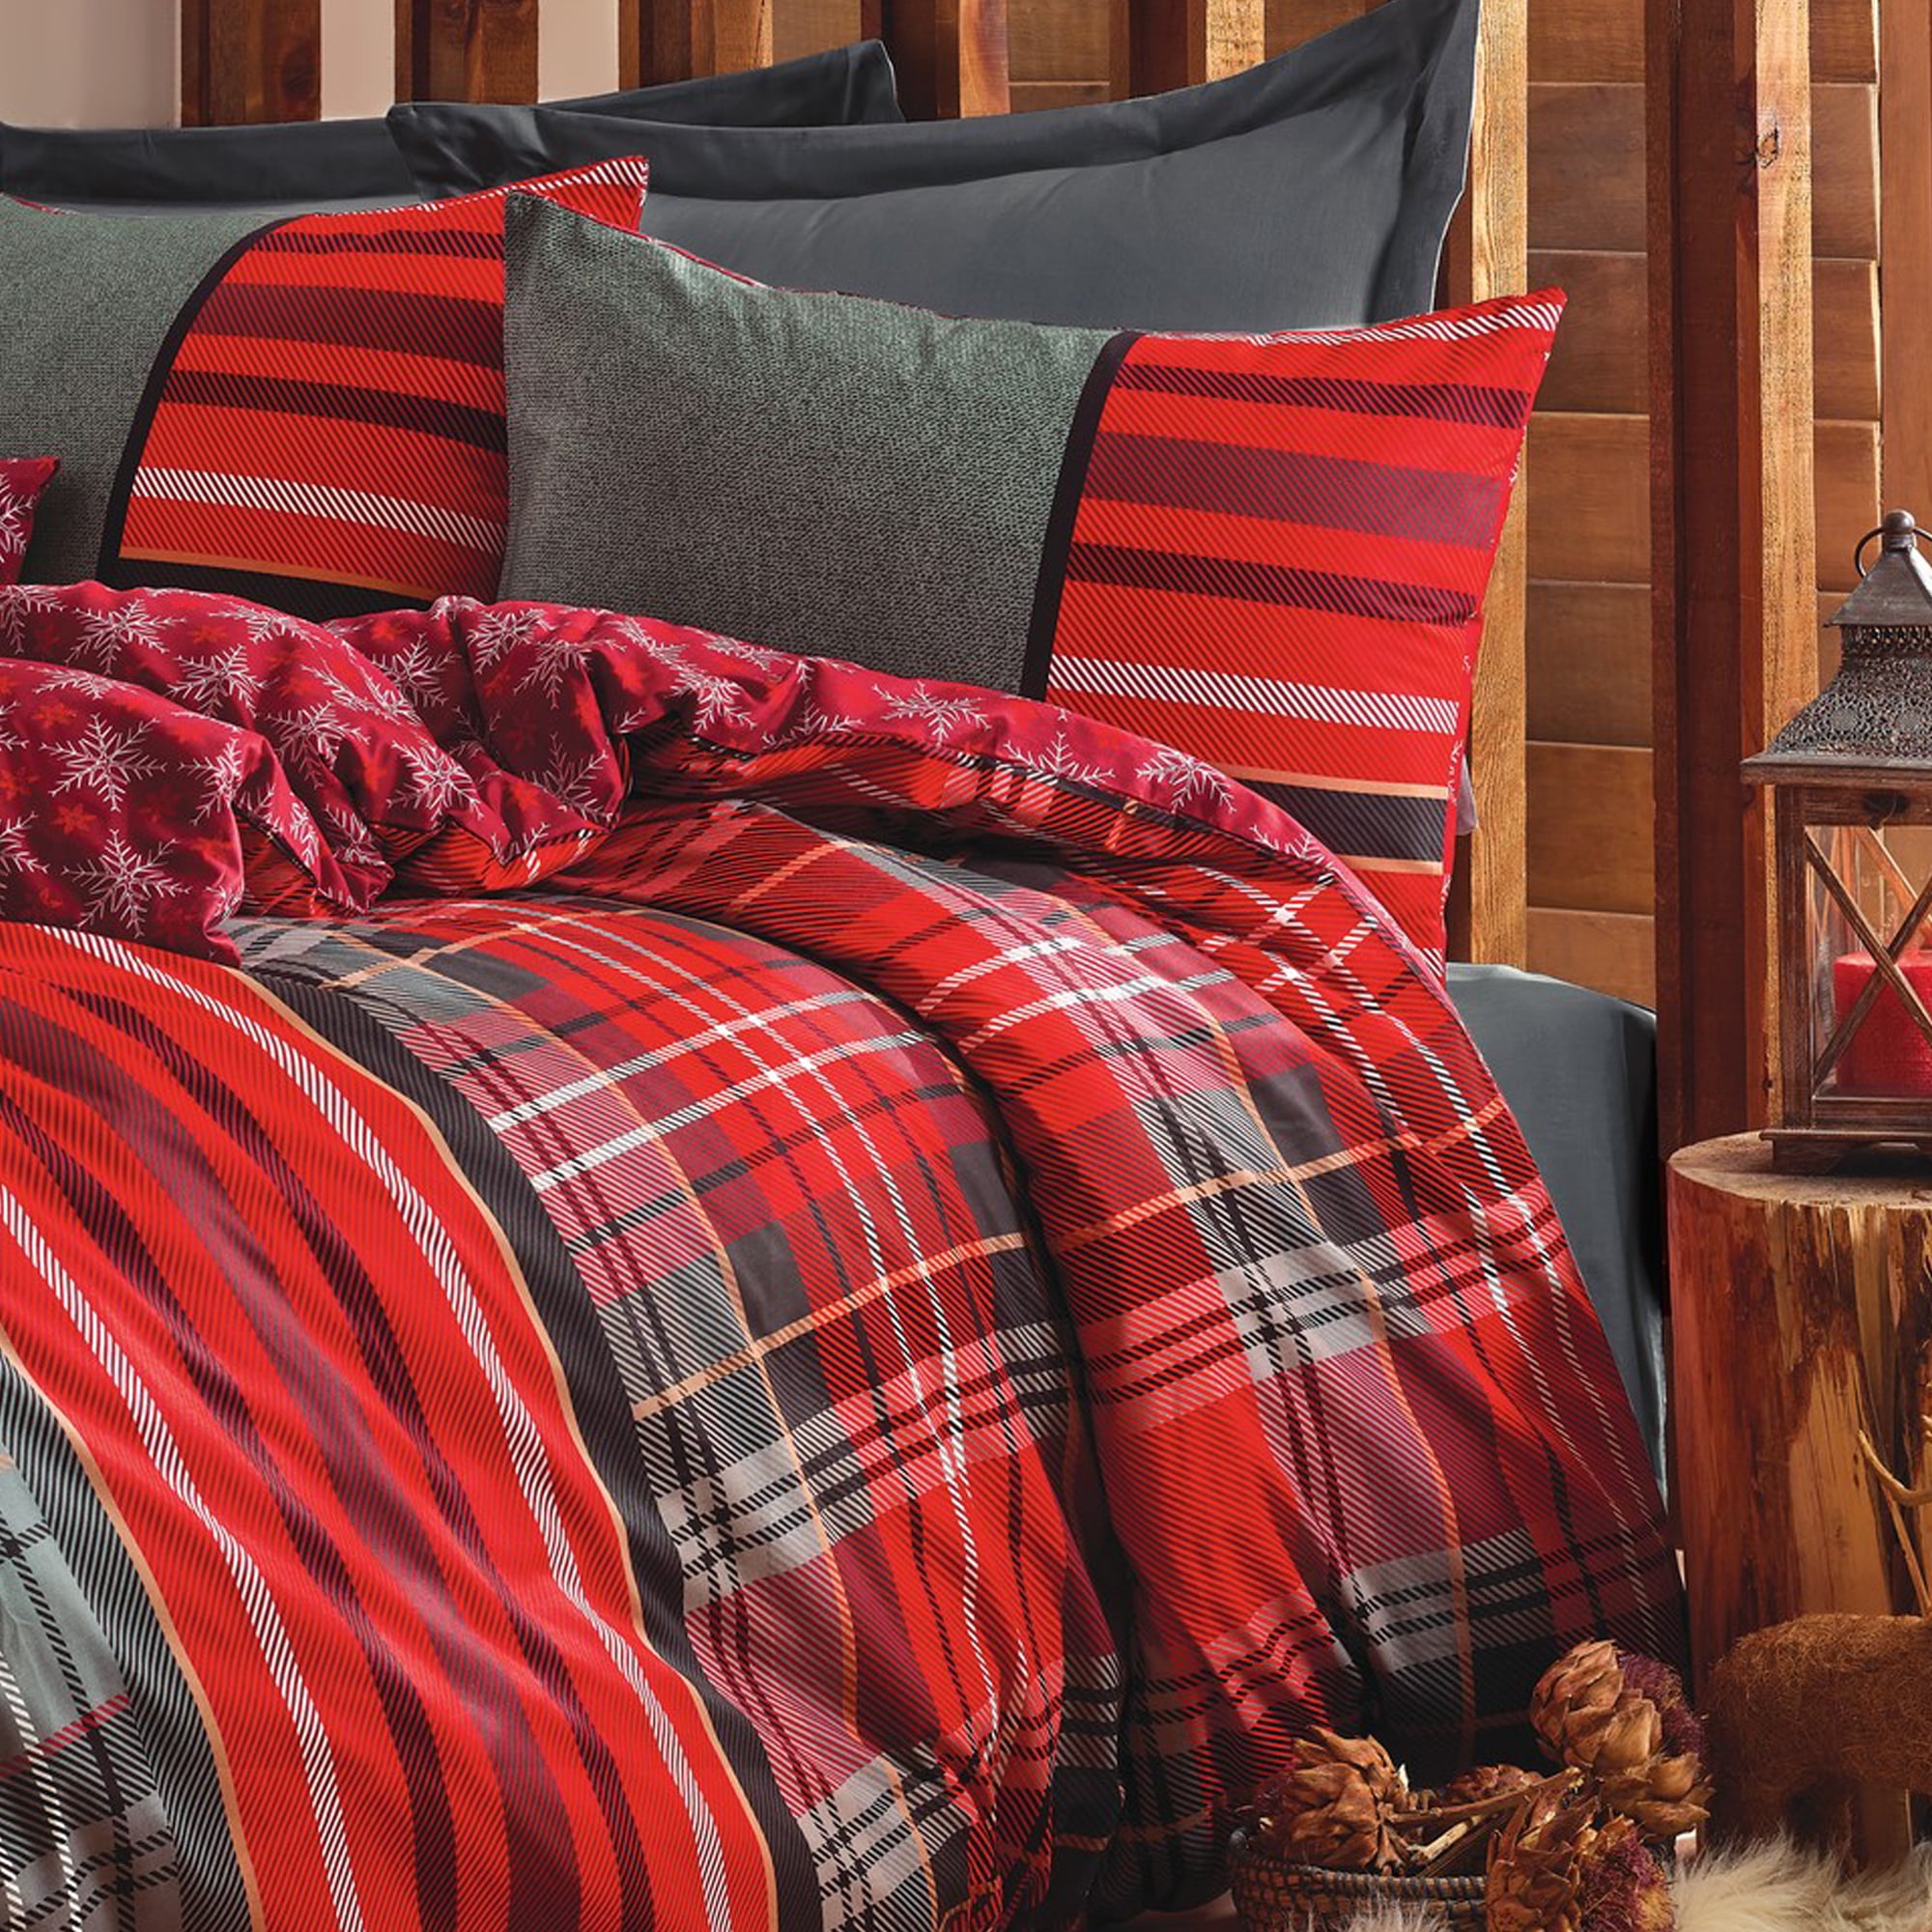 Cotton Duvet Cover Set Red Queen Size, Red And Black Duvet Cover Cotton